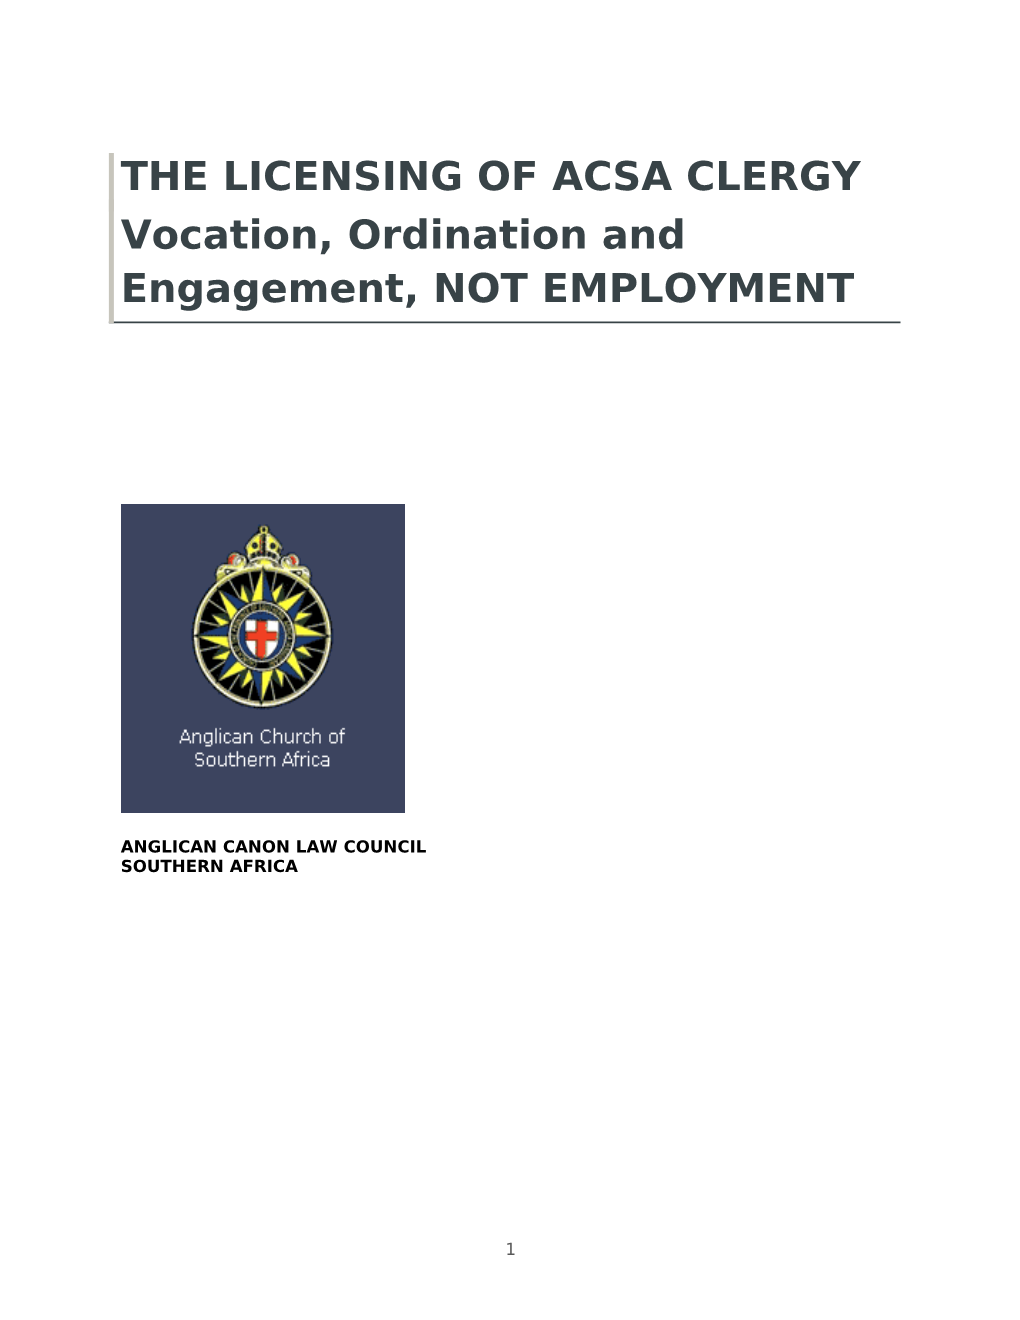 THE LICENSING of ACSA CLERGY Vocation, Ordination and Engagement, NOT EMPLOYMENT